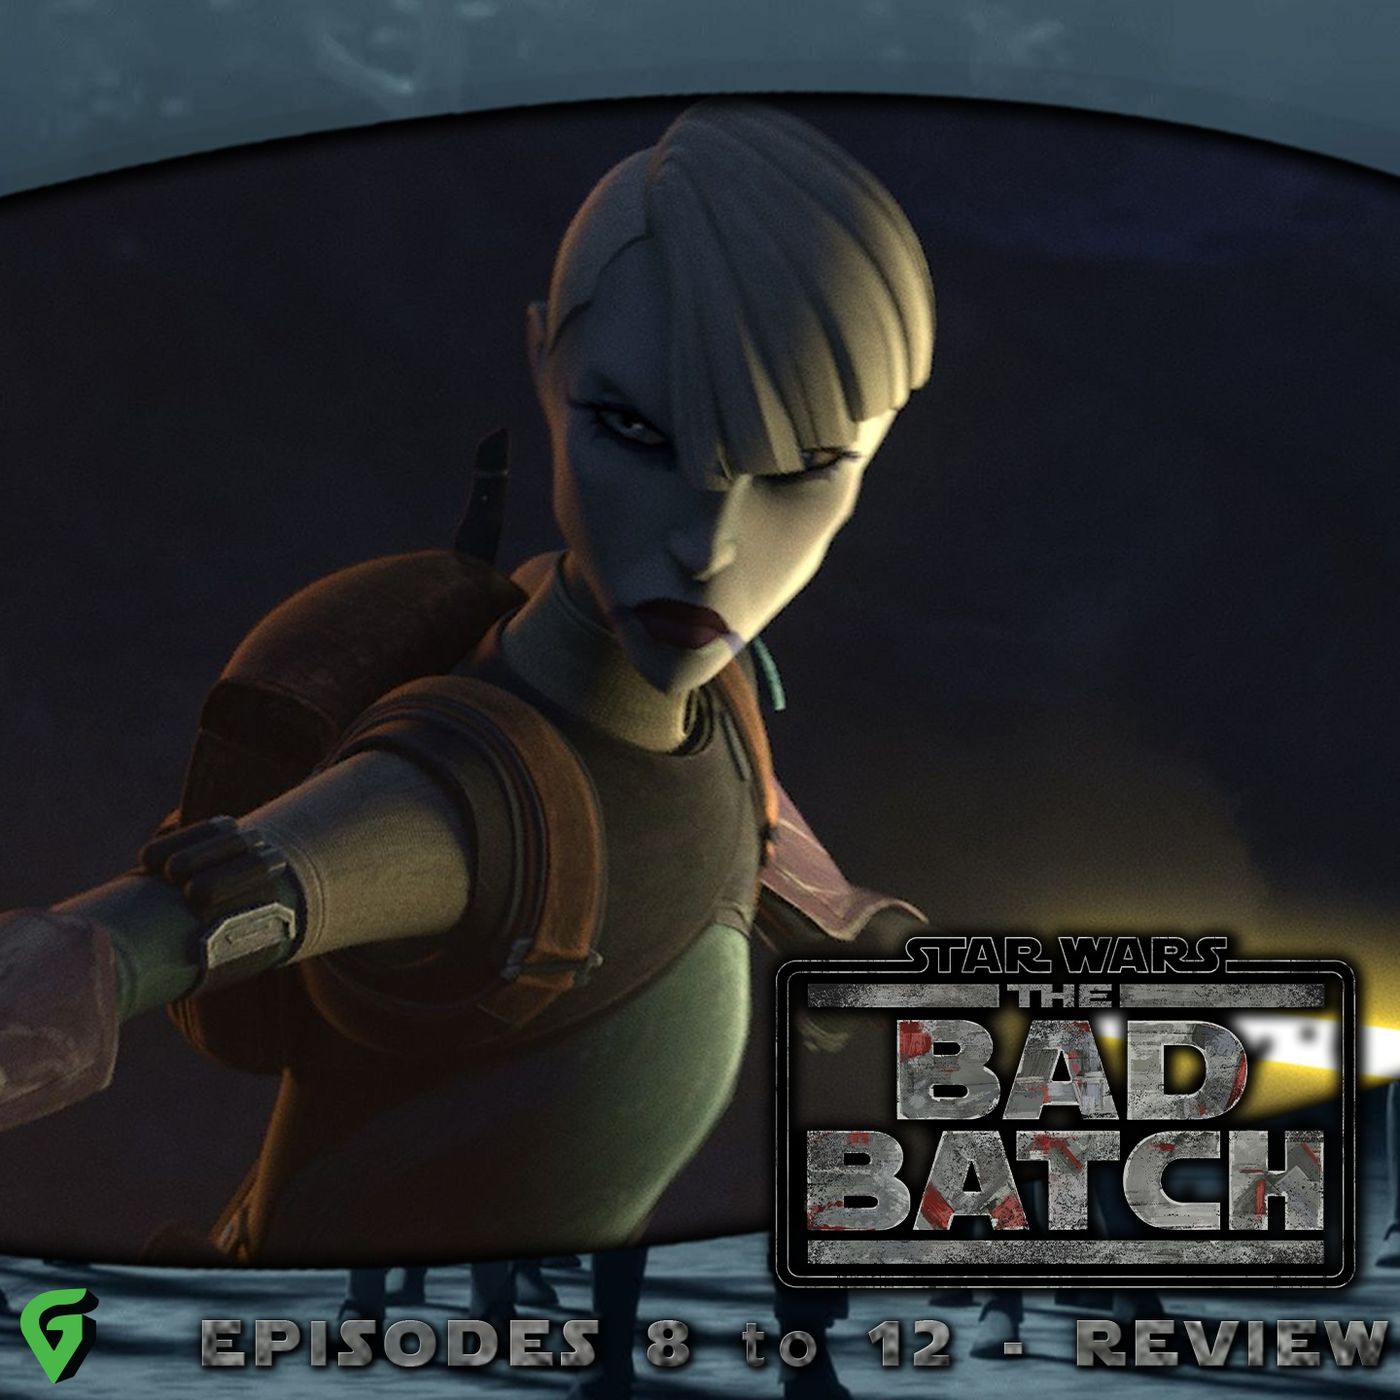 The Bad Batch Season 3 Episodes 8-12 Spoilers Review